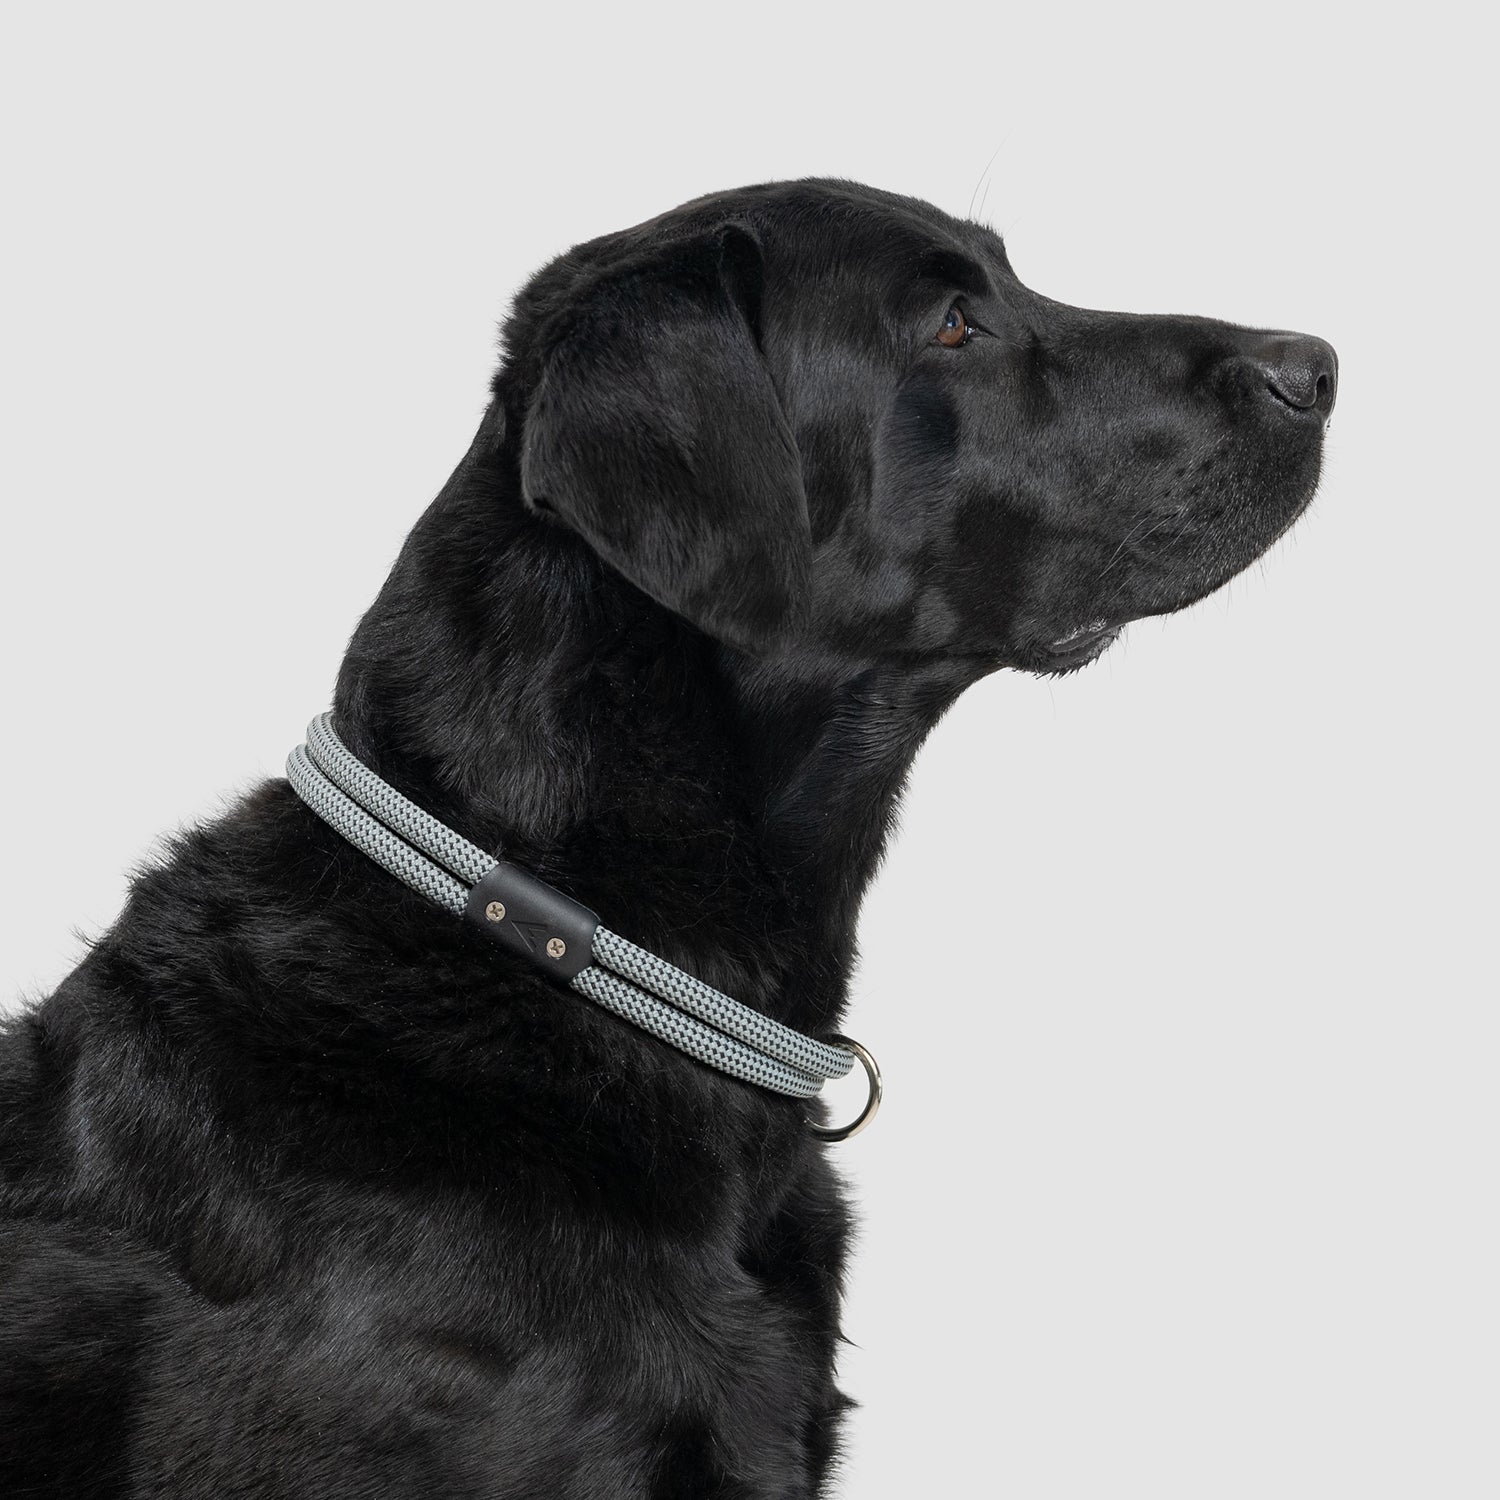 lifetime collar fixed length rope collar for active dogs handmade in colorado by atlas pet company